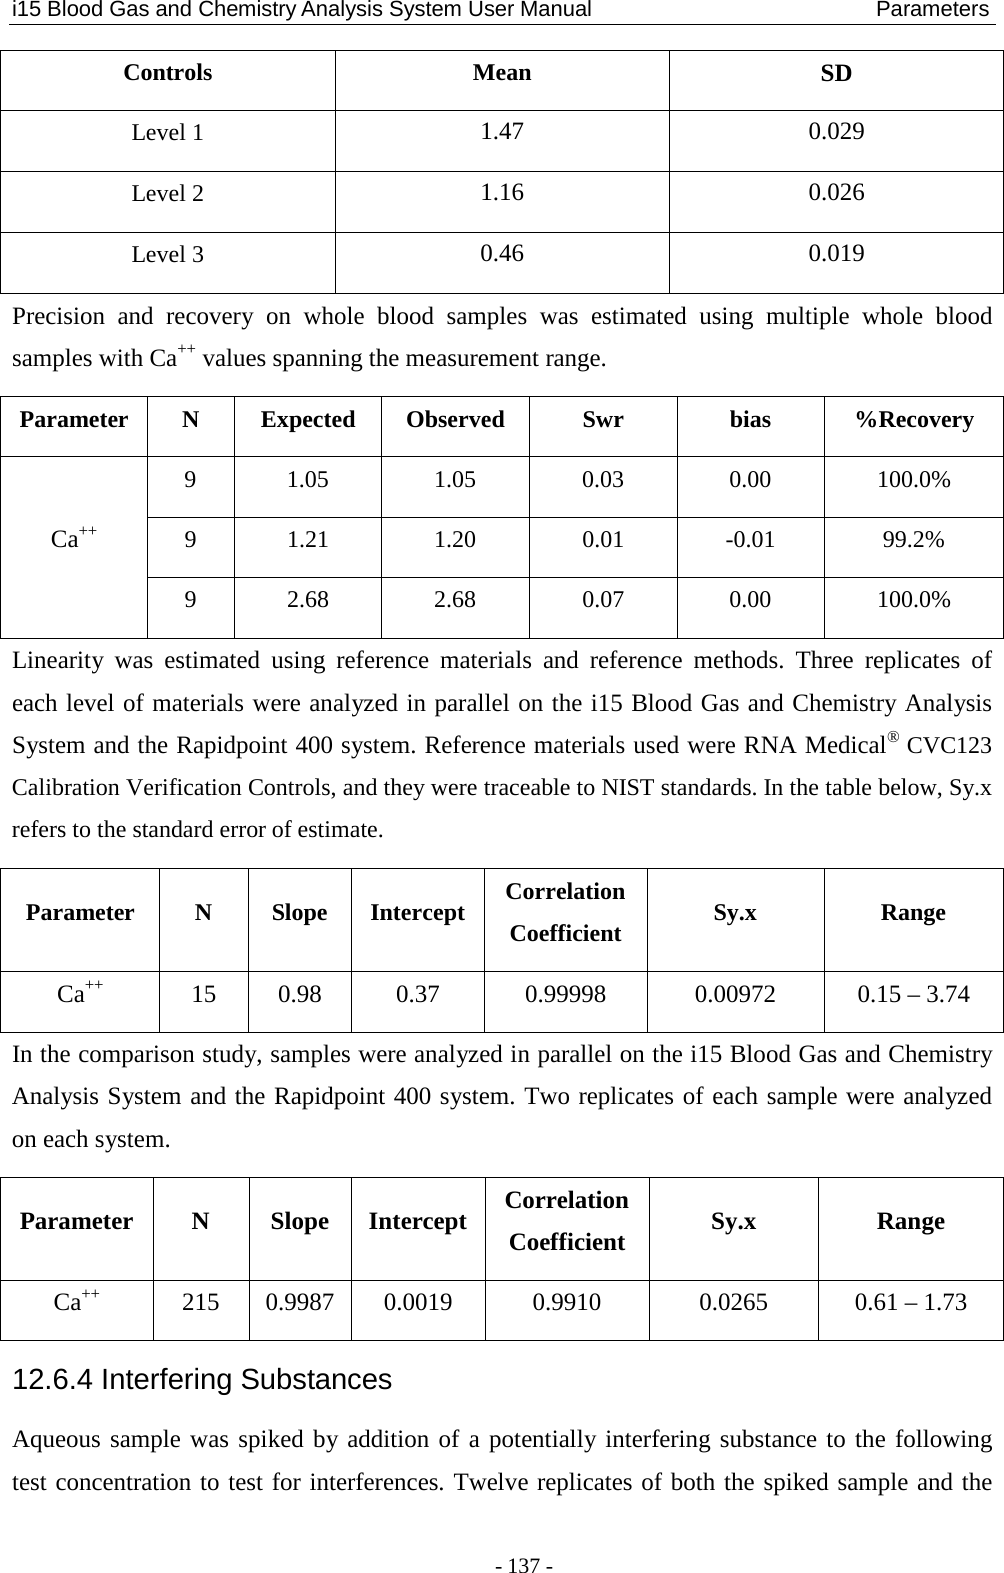 i15 Blood Gas and Chemistry Analysis System User Manual                            Parameters - 137 - Controls  Mean SD Level 1 1.47  0.029 Level 2  1.16  0.026 Level 3 0.46  0.019 Precision and recovery on whole blood samples was estimated using multiple whole blood samples with Ca++ values spanning the measurement range. Parameter  N  Expected  Observed Swr bias %Recovery Ca++ 9  1.05  1.05  0.03  0.00  100.0% 9  1.21  1.20  0.01  -0.01  99.2% 9  2.68  2.68  0.07  0.00  100.0% Linearity was estimated using reference materials and reference methods. Three  replicates of each level of materials were analyzed in parallel on the i15 Blood Gas and Chemistry Analysis System and the Rapidpoint 400 system. Reference materials used were RNA Medical® CVC123 Calibration Verification Controls, and they were traceable to NIST standards. In the table below, Sy.x refers to the standard error of estimate. Parameter  N  Slope Intercept Correlation Coefficient  Sy.x  Range Ca++ 15  0.98  0.37  0.99998  0.00972  0.15 – 3.74 In the comparison study, samples were analyzed in parallel on the i15 Blood Gas and Chemistry Analysis System and the Rapidpoint 400 system. Two replicates of each sample were analyzed on each system. Parameter  N  Slope Intercept Correlation Coefficient Sy.x  Range Ca++ 215  0.9987  0.0019  0.9910  0.0265  0.61 – 1.73 12.6.4 Interfering Substances Aqueous sample was spiked by addition of a potentially interfering substance to the following test concentration to test for interferences. Twelve replicates of both the spiked sample and the 